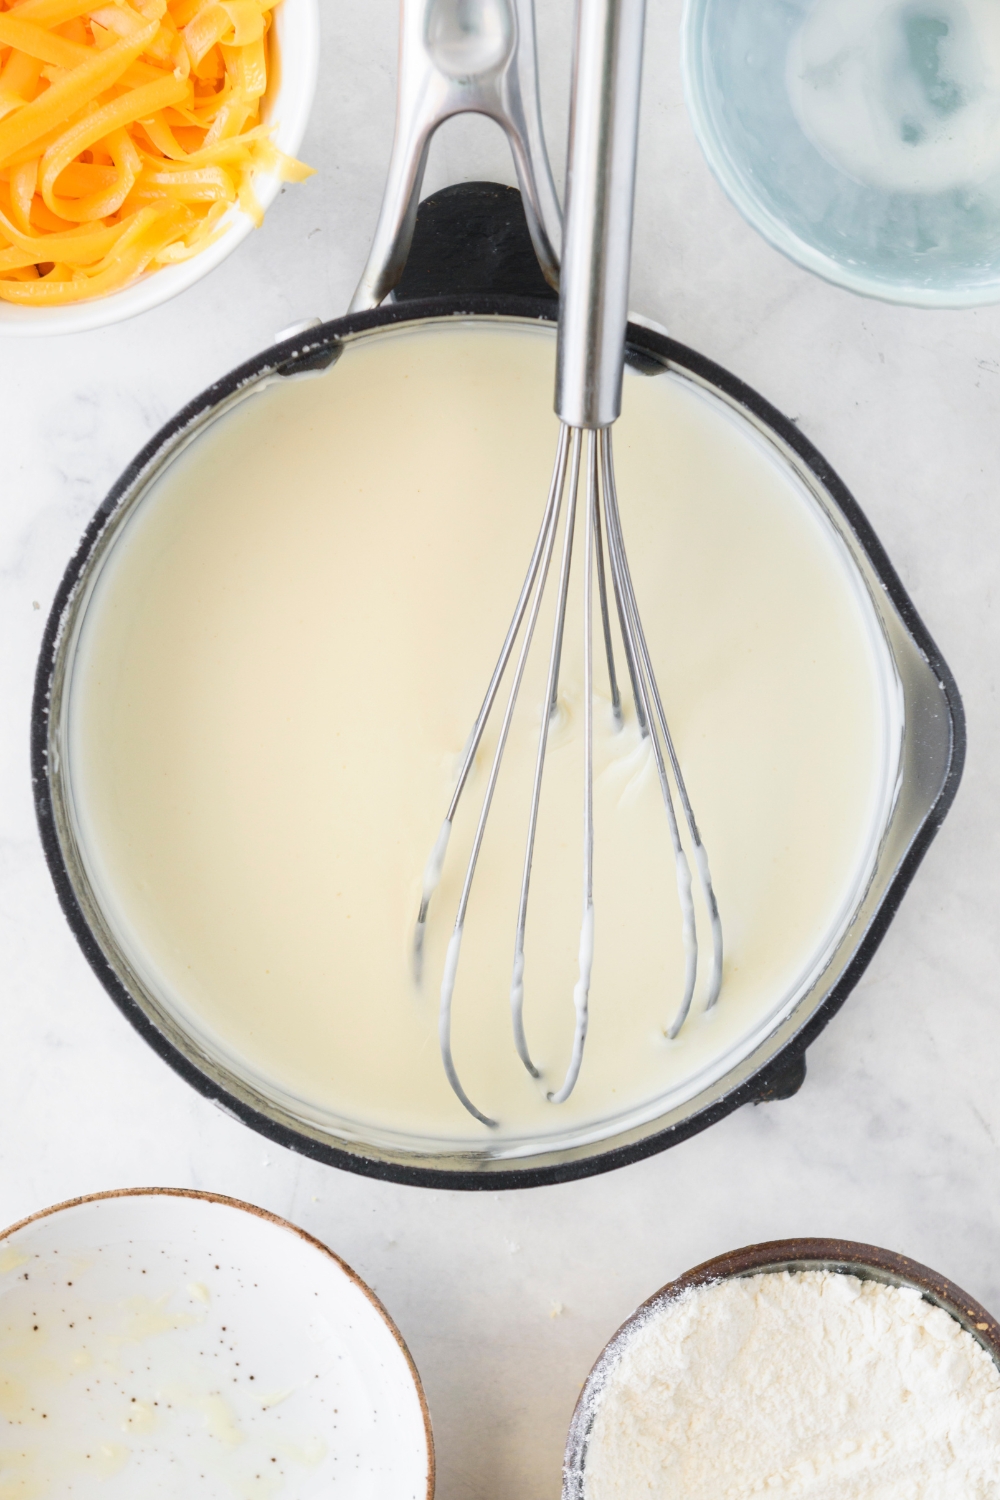 A pan filled with cream sauce and a whisk is in the pan.